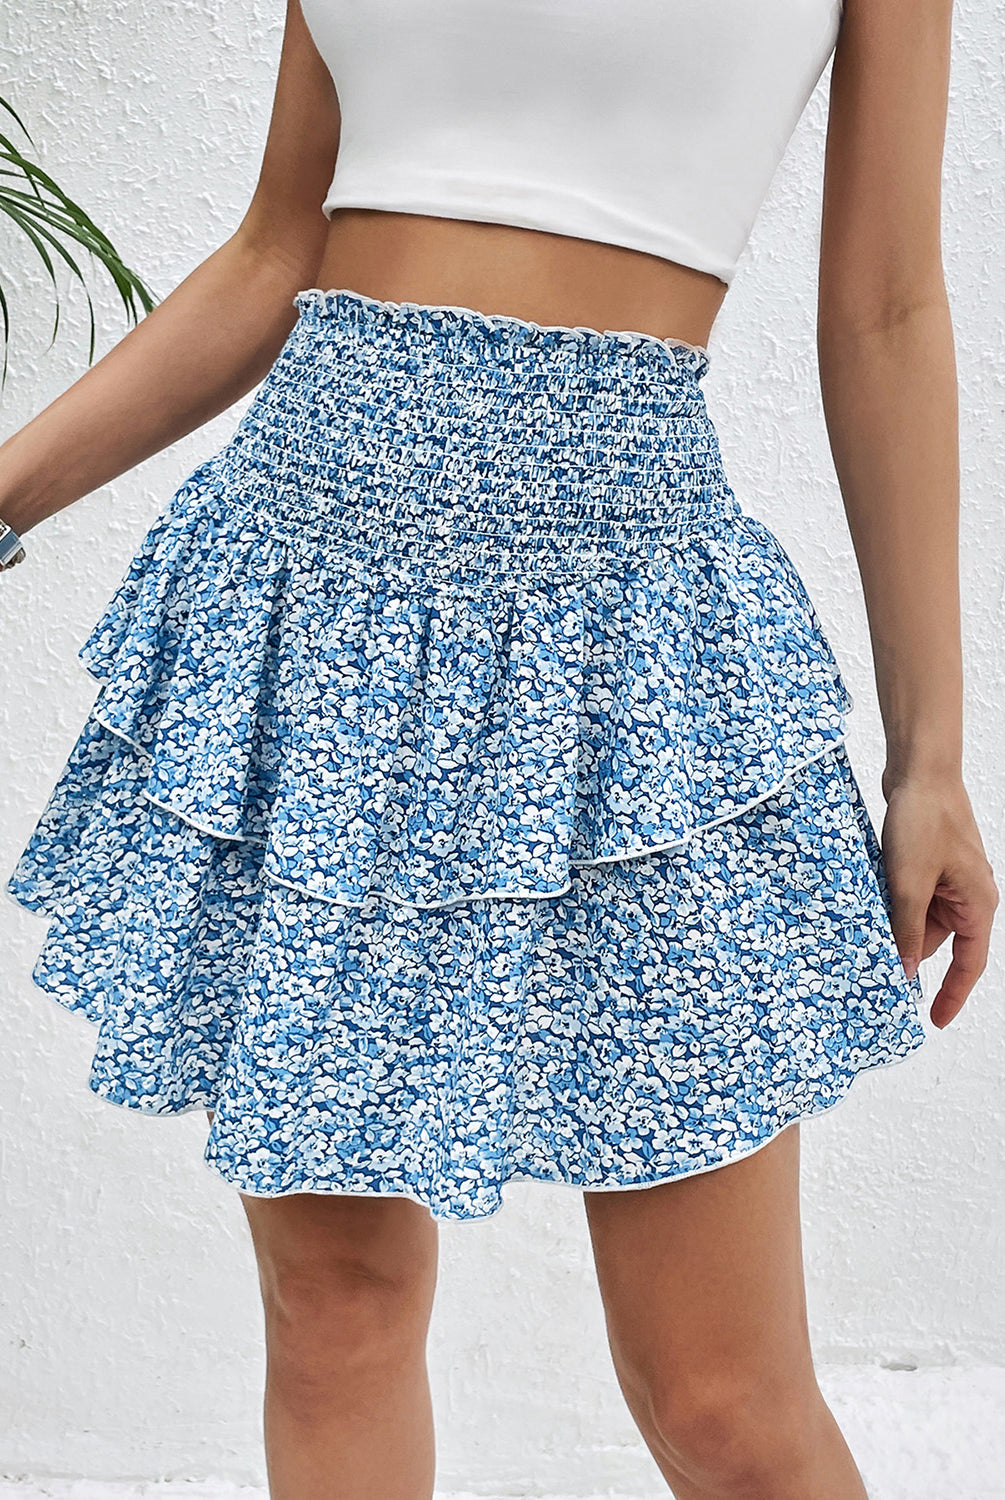 Woman wearing a printed layered smocked sky blue mini skirt with a white crop top.